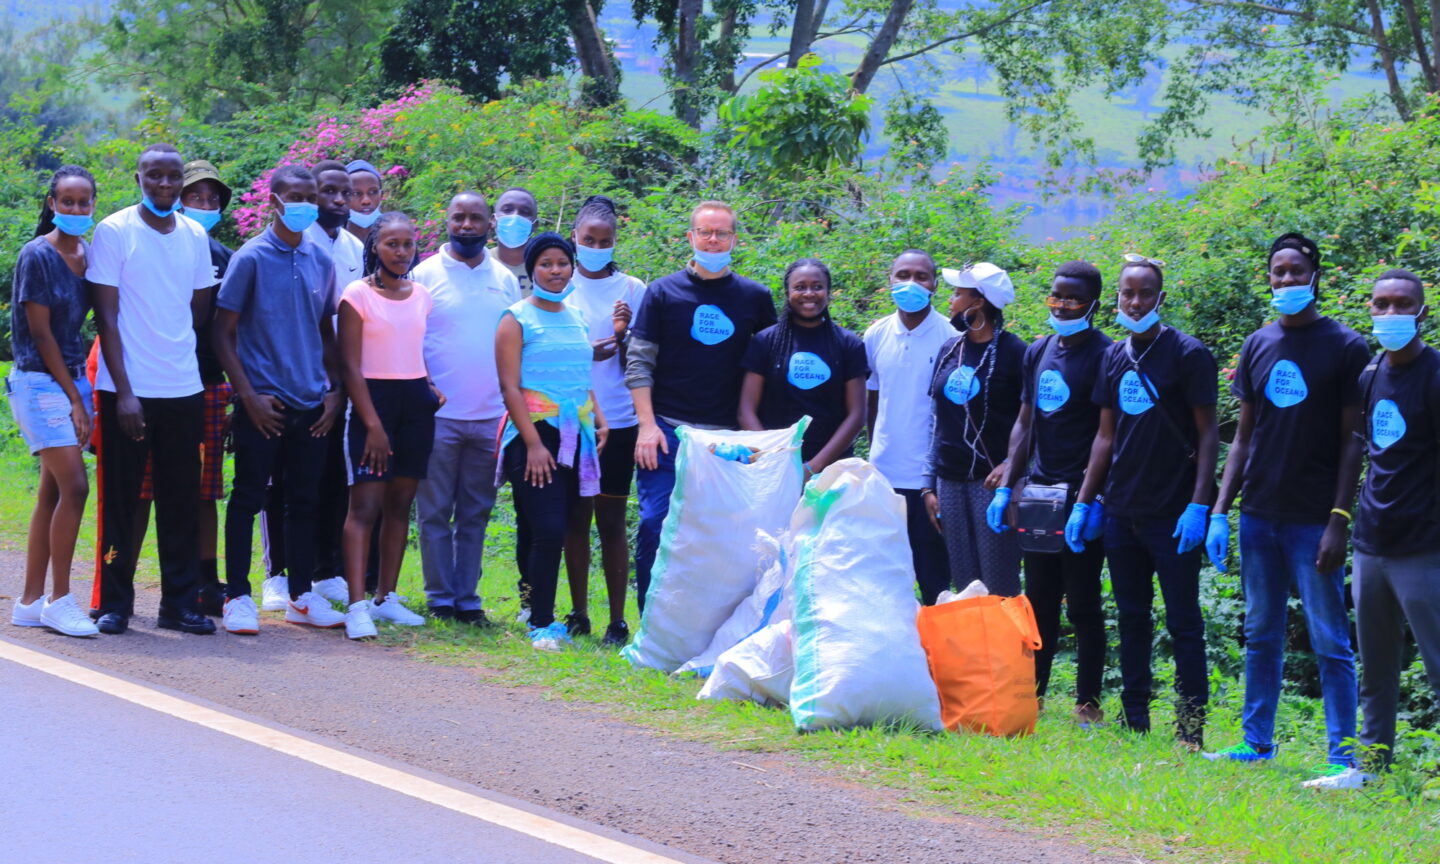 A large group of people stand behind bags for collecting recycle waste